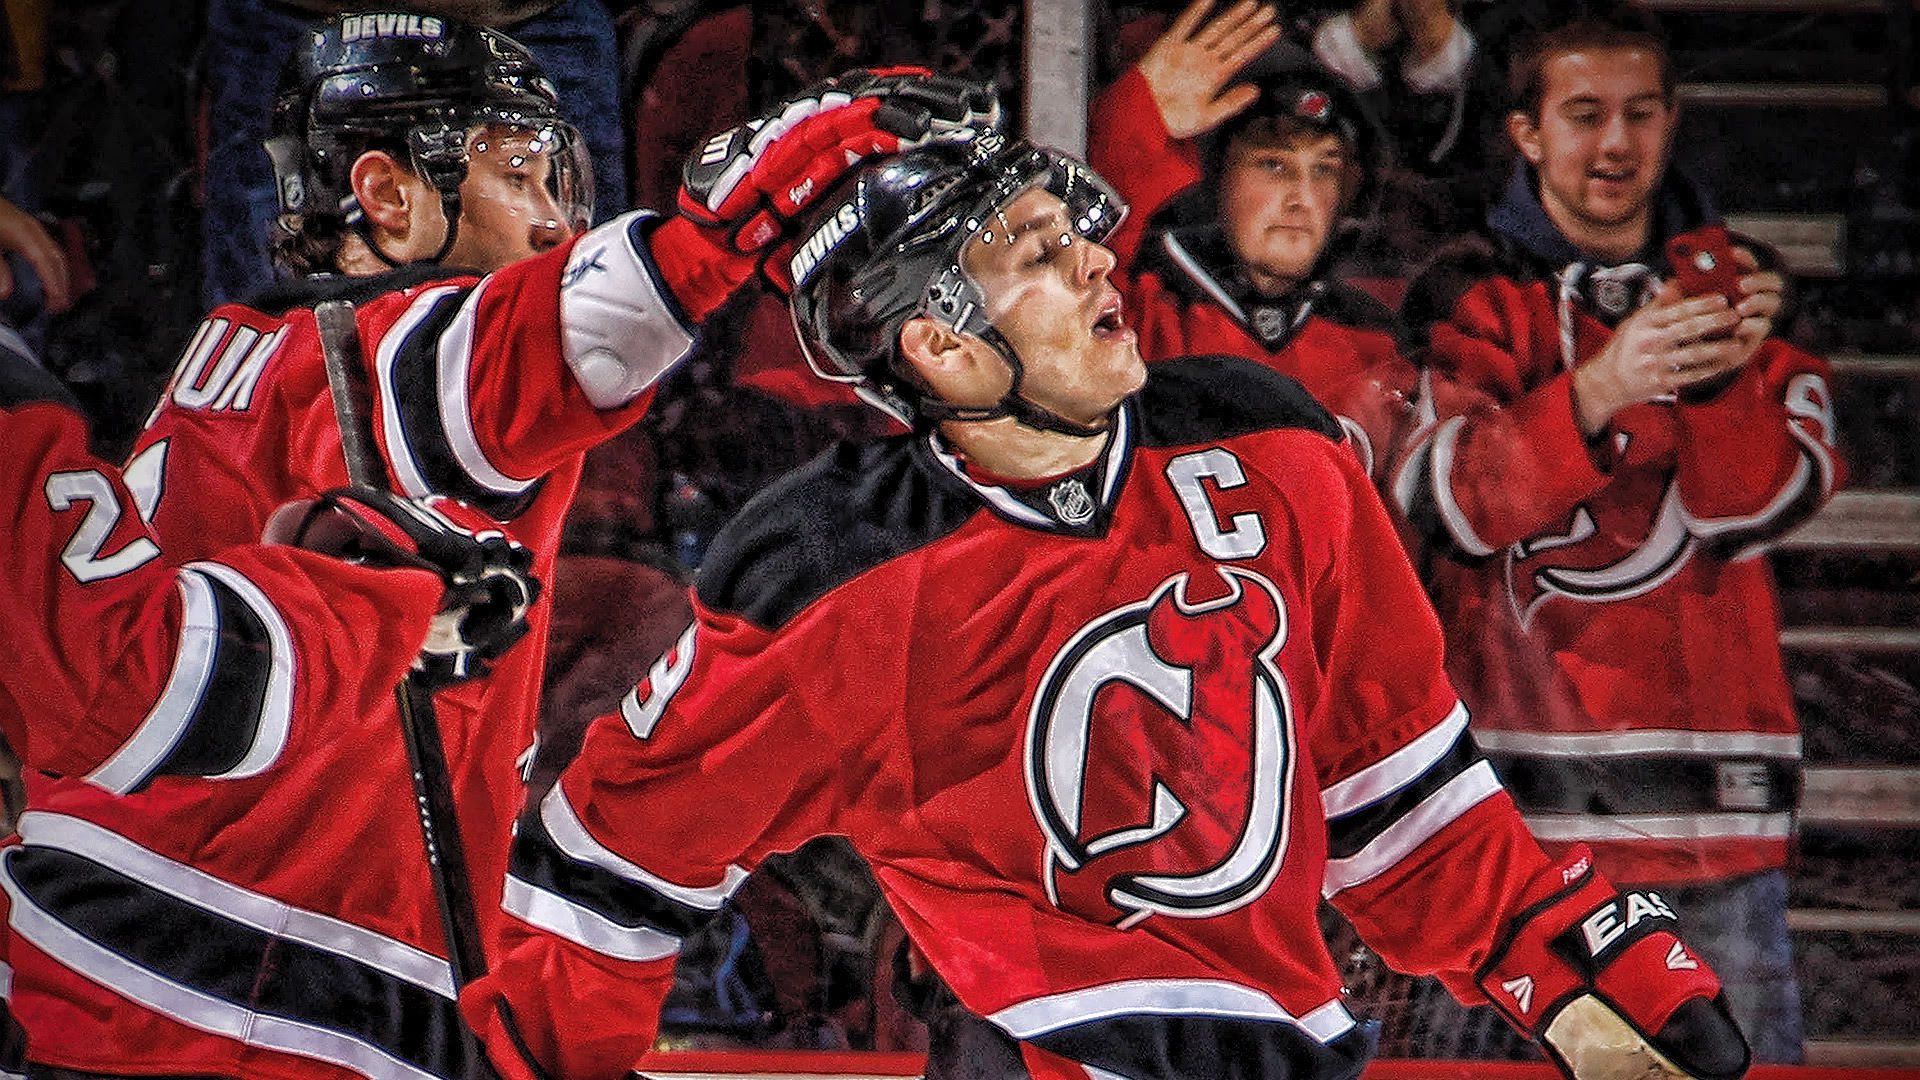 Player of NHL Zach Parise wallpapers and images - wallpapers